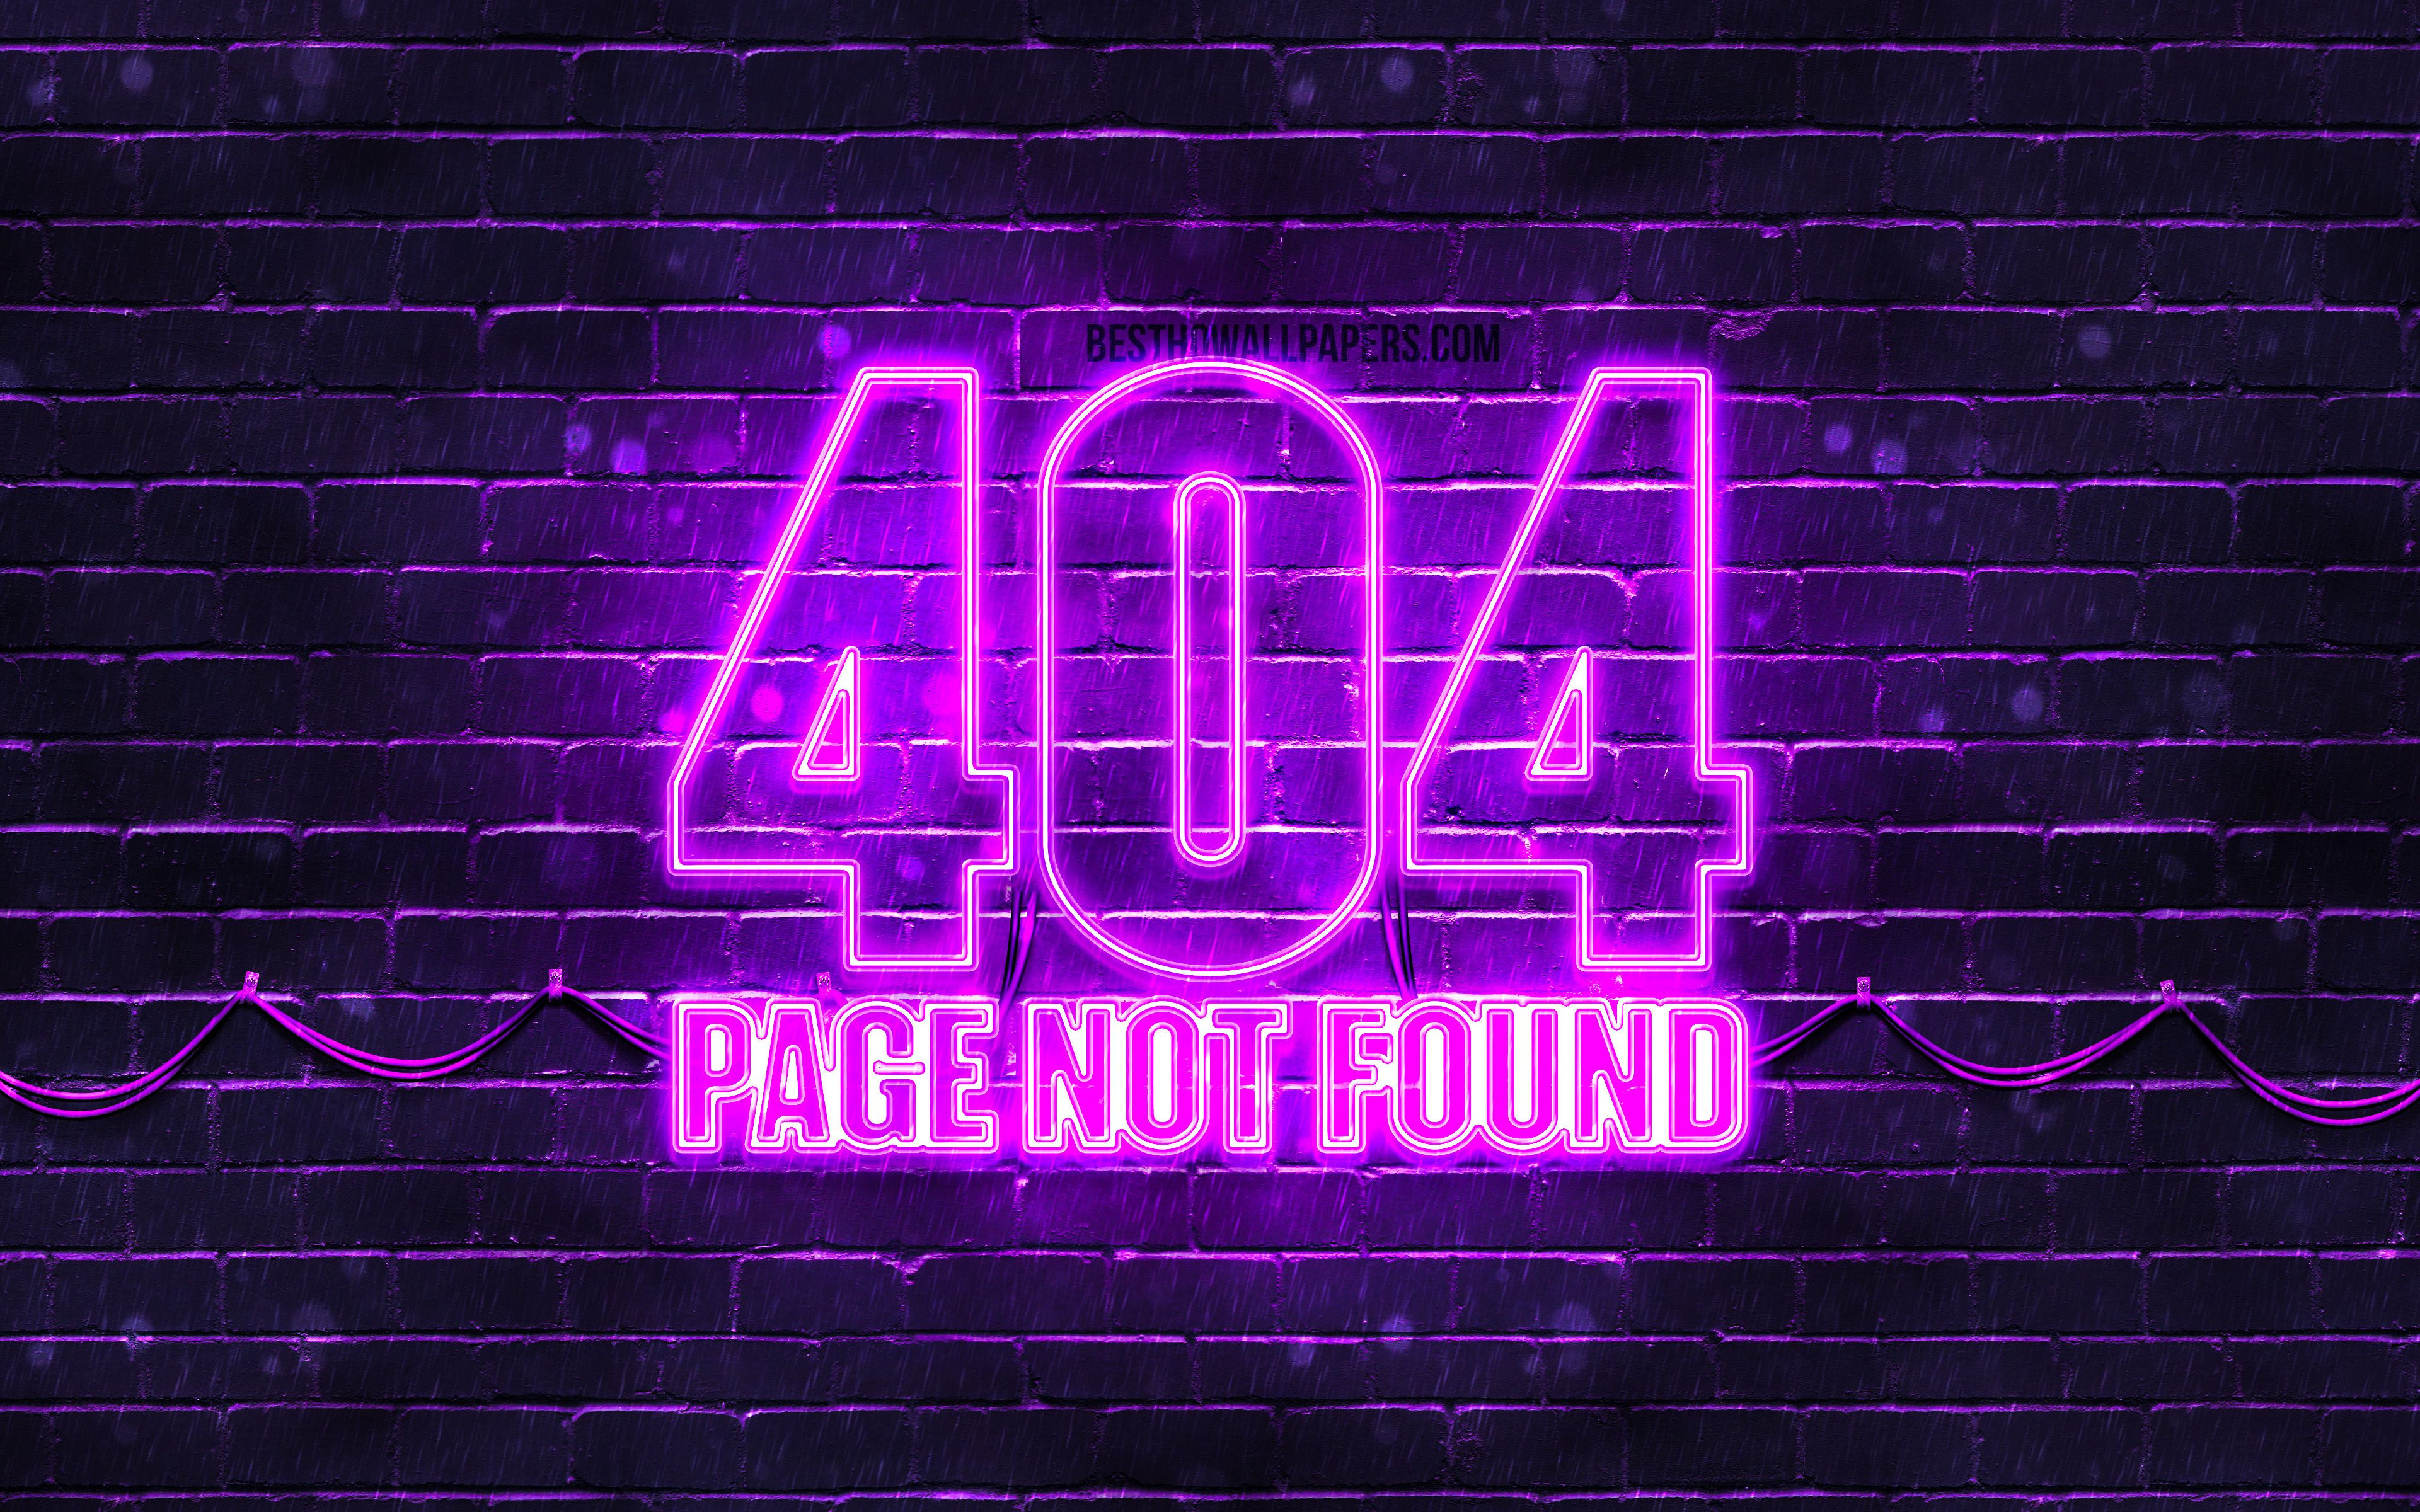 Download wallpaper 404 Page not found violet logo, 4k, violet brickwall, 404 Page not found logo, brands, 404 Page not found neon symbol, 404 Page not found for desktop with resolution 3840x2400